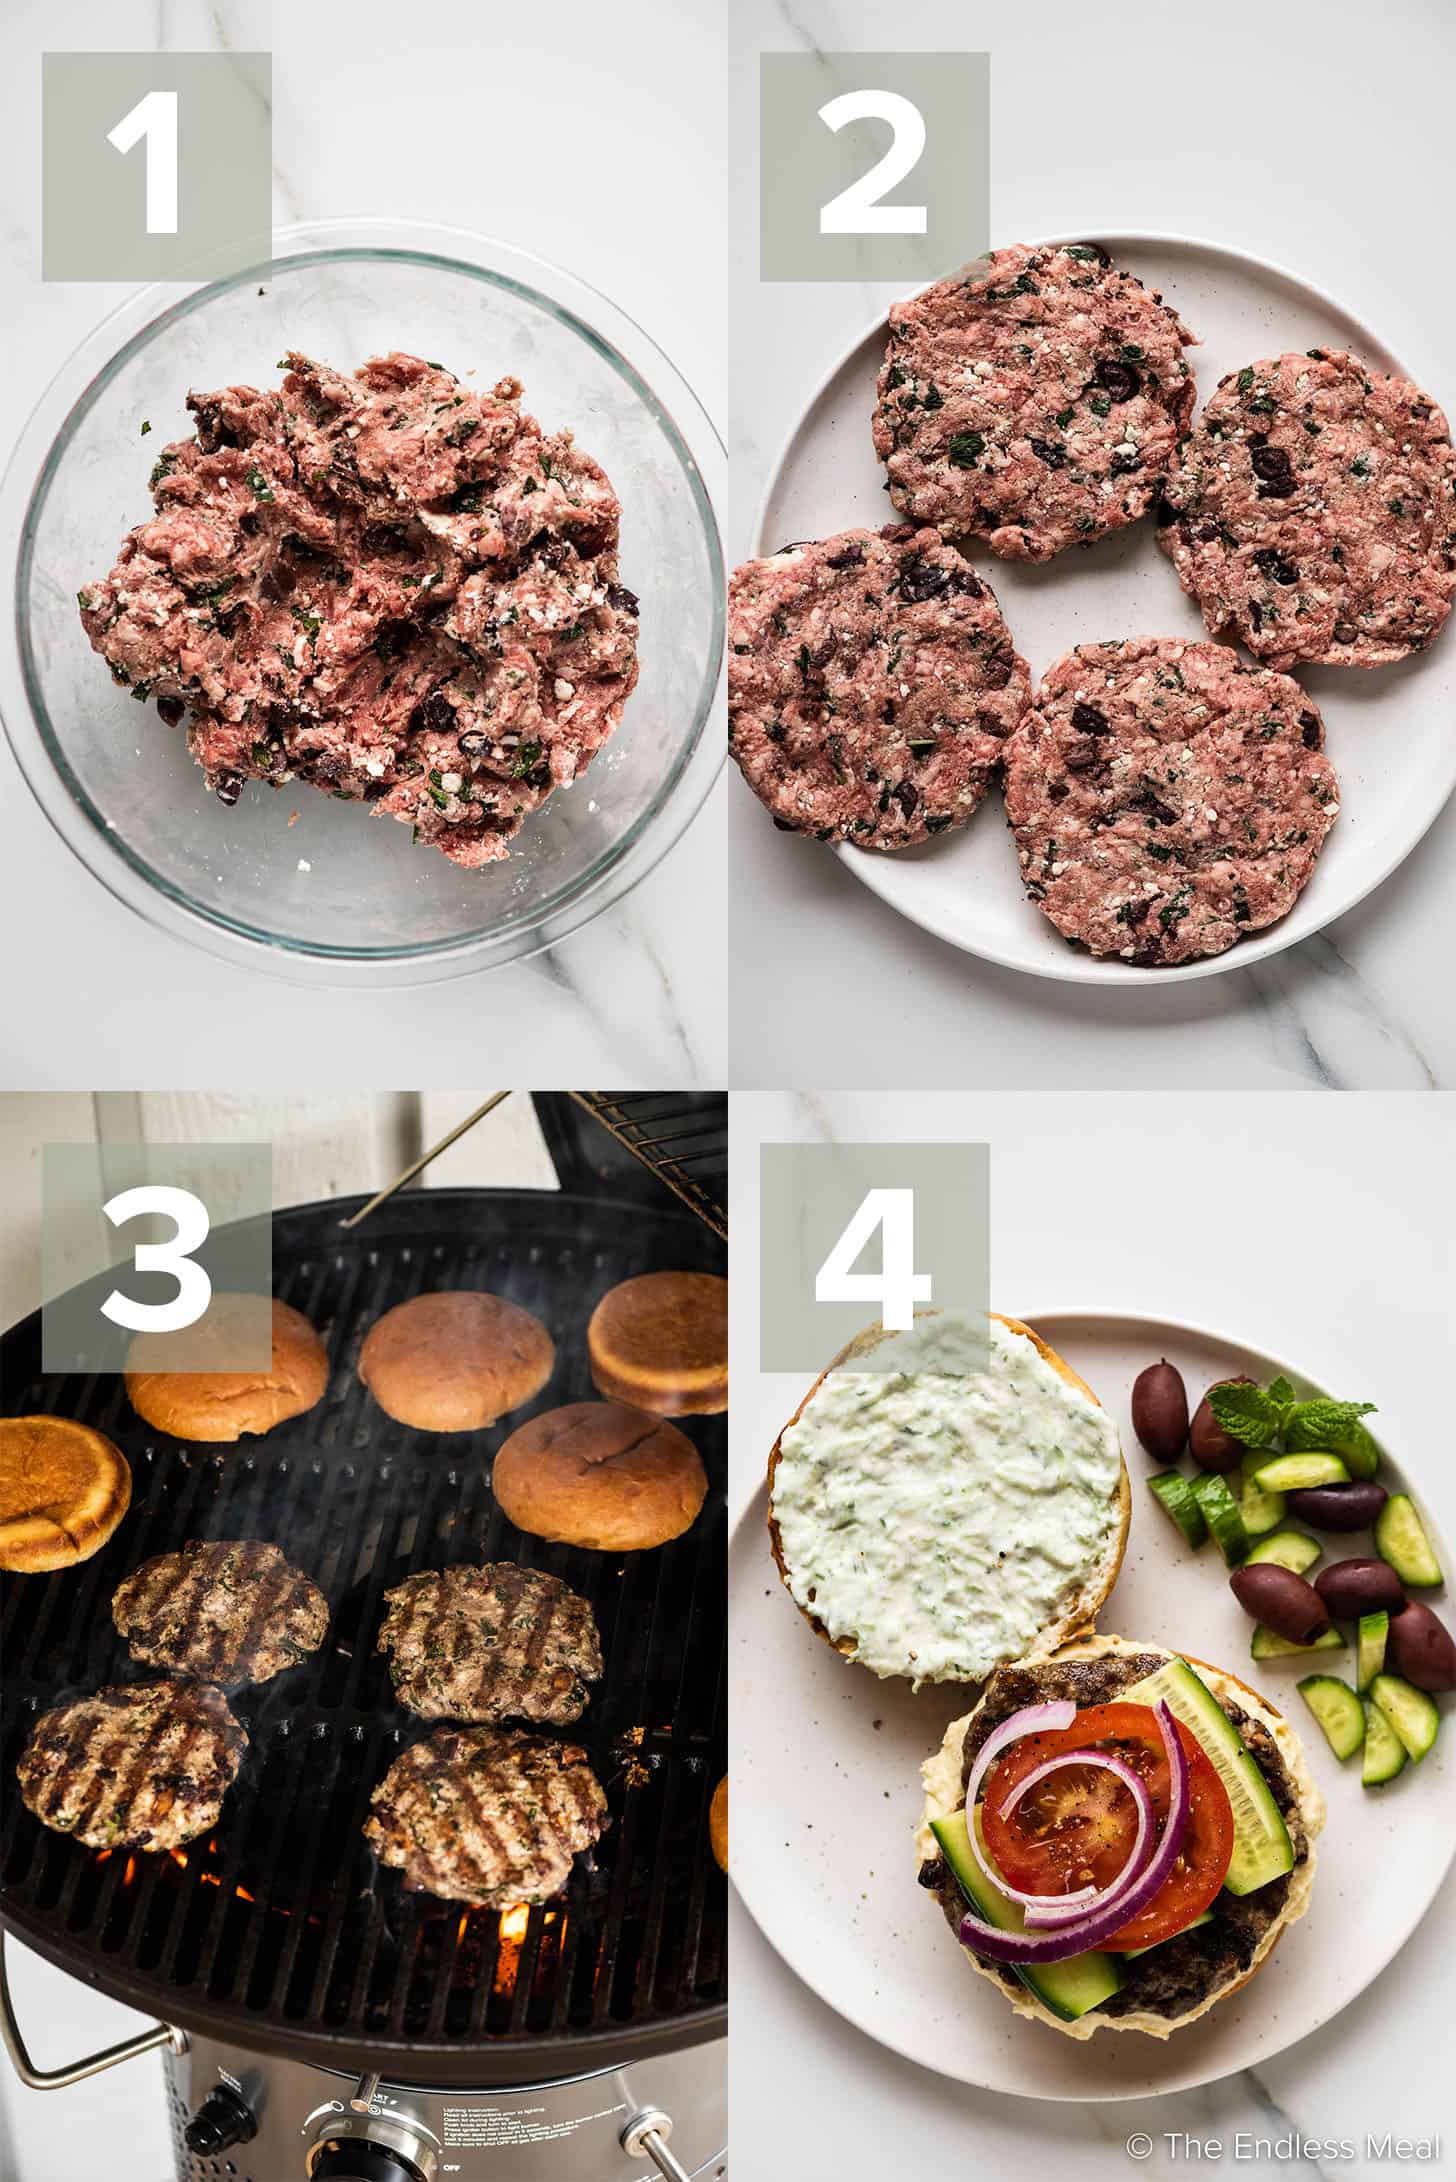 4 pictures showing how to make this Lamb Burger Recipe